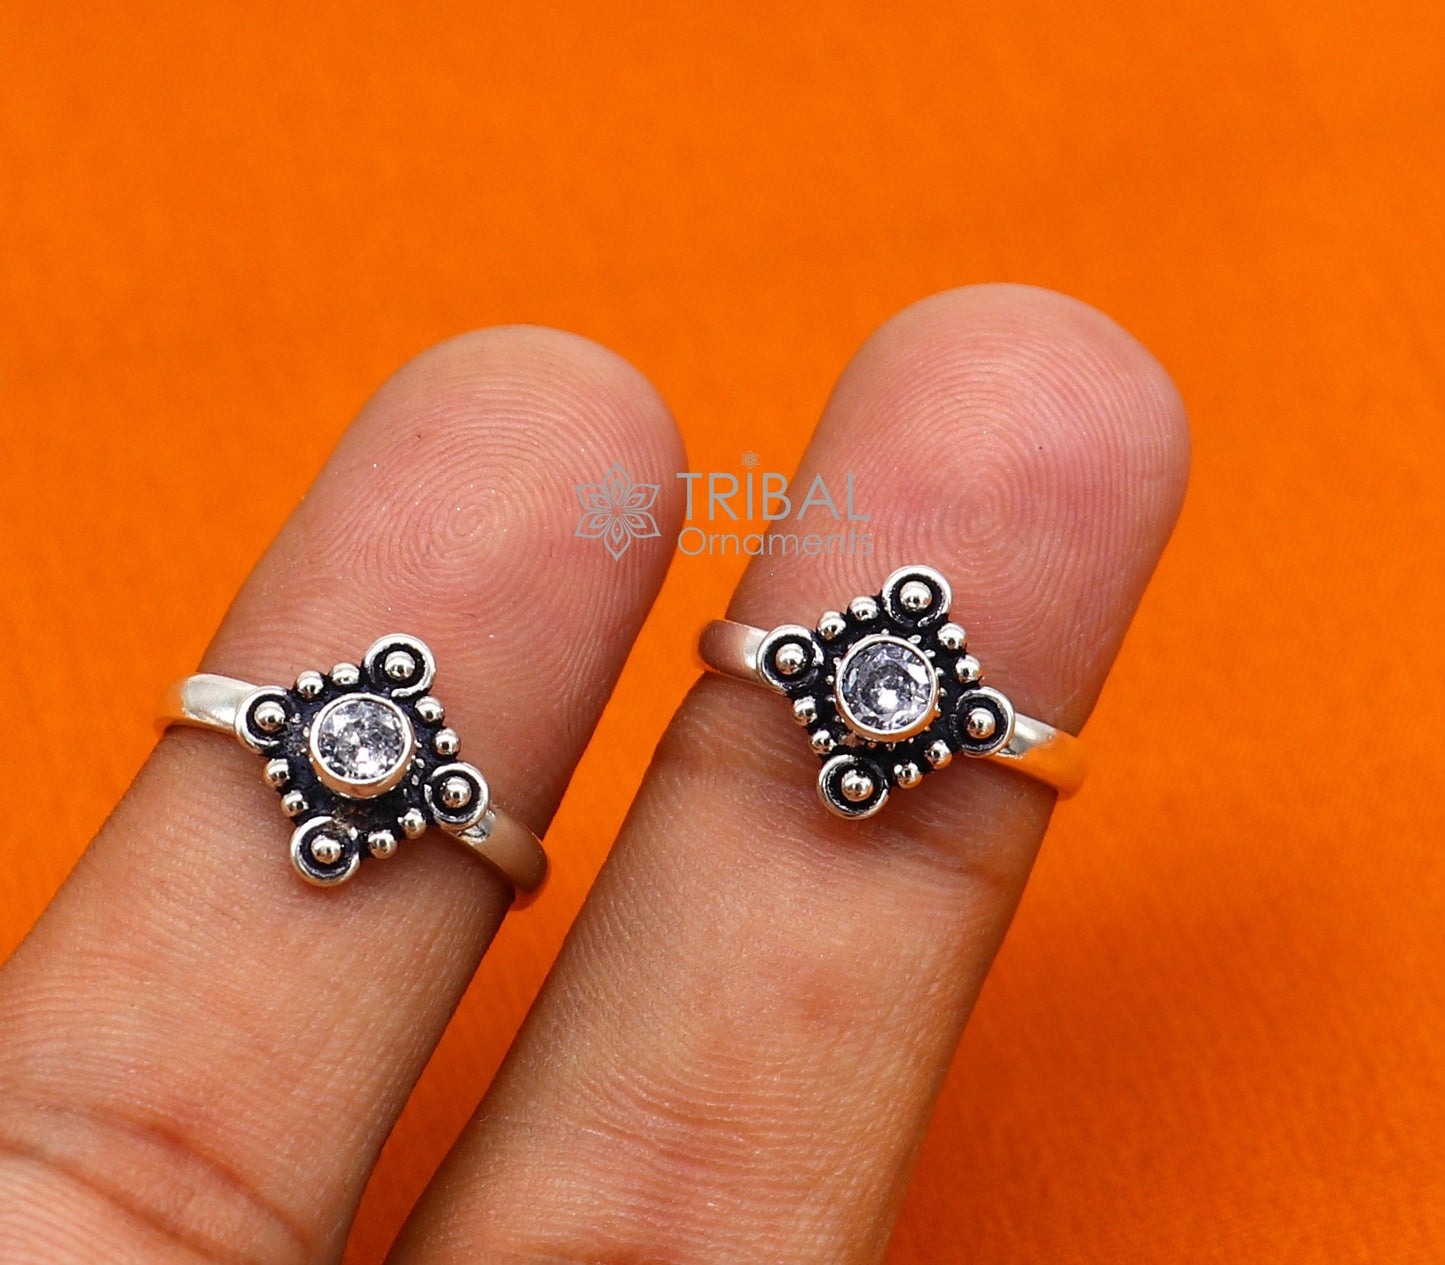 925 sterling silver adjustable size toe ring band cubic zircon stone tribal belly dance ethnic cultural  jewelry from india ntr91 - TRIBAL ORNAMENTS